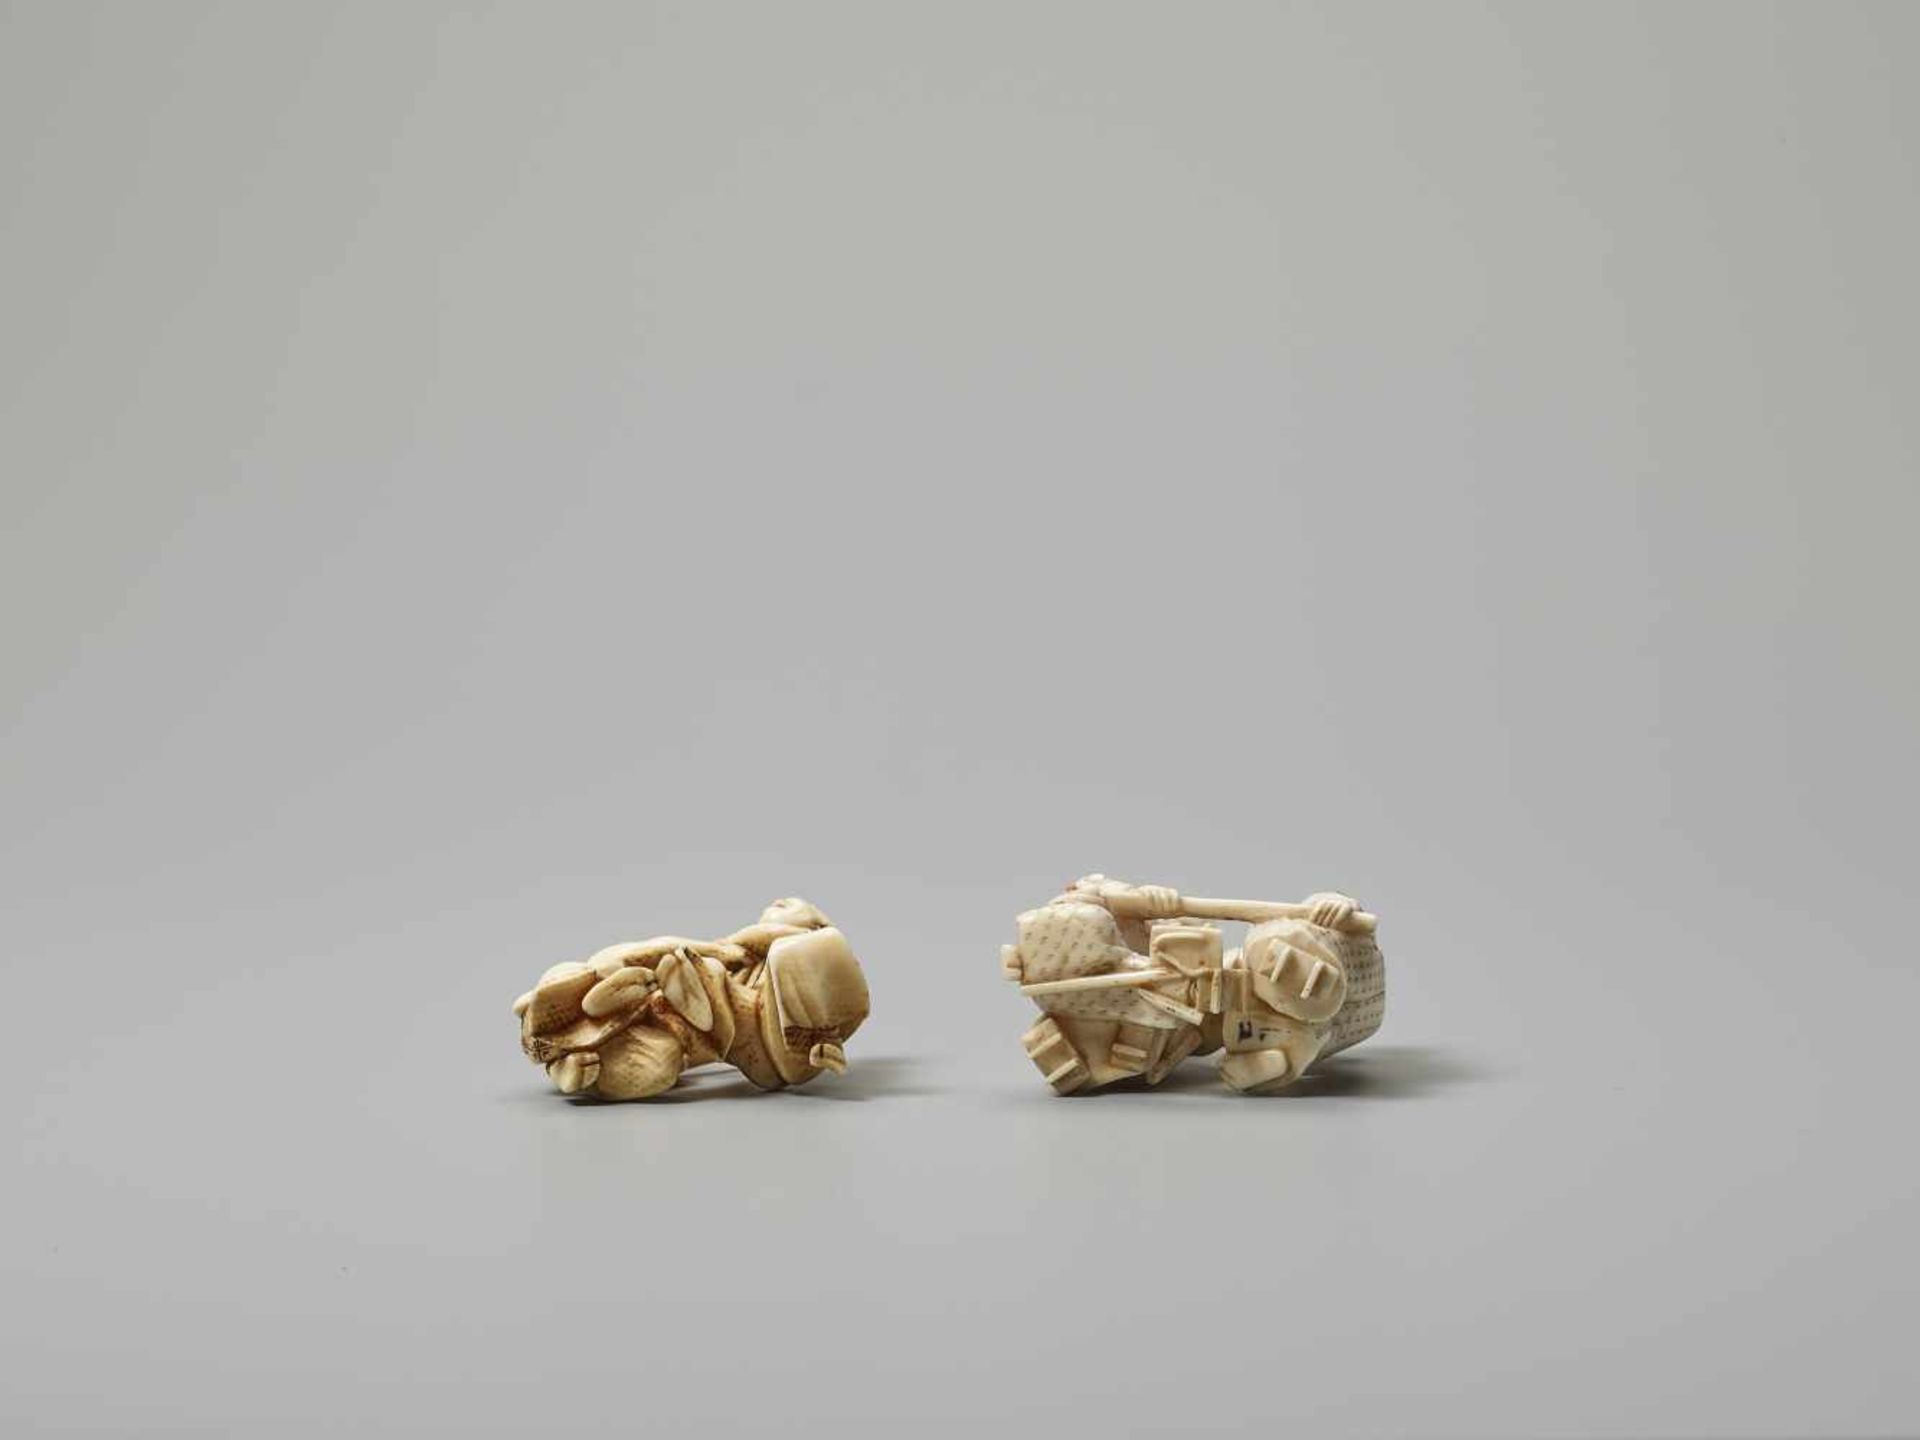 TWO IVORY NETSUKE OF BLIND MEN FIGHTING Unsigned, one with inlaysJapan, Meiji period (1868-1912) - Image 3 of 3